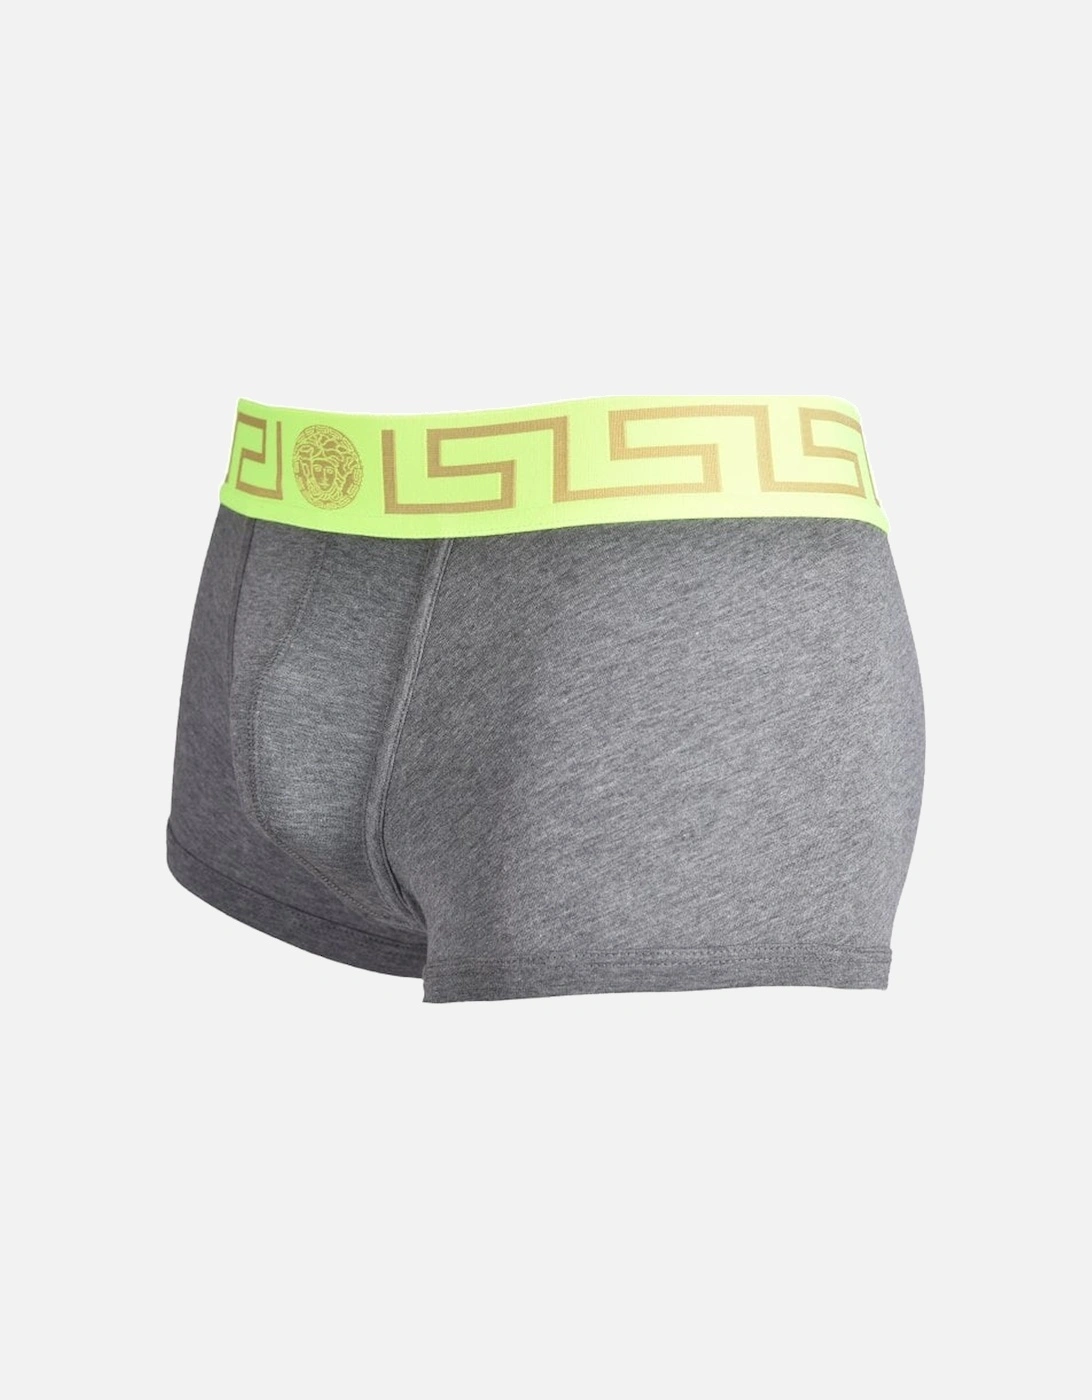 Iconic Greca Low-Rise Boxer Trunk, Grey and Neon Yellow